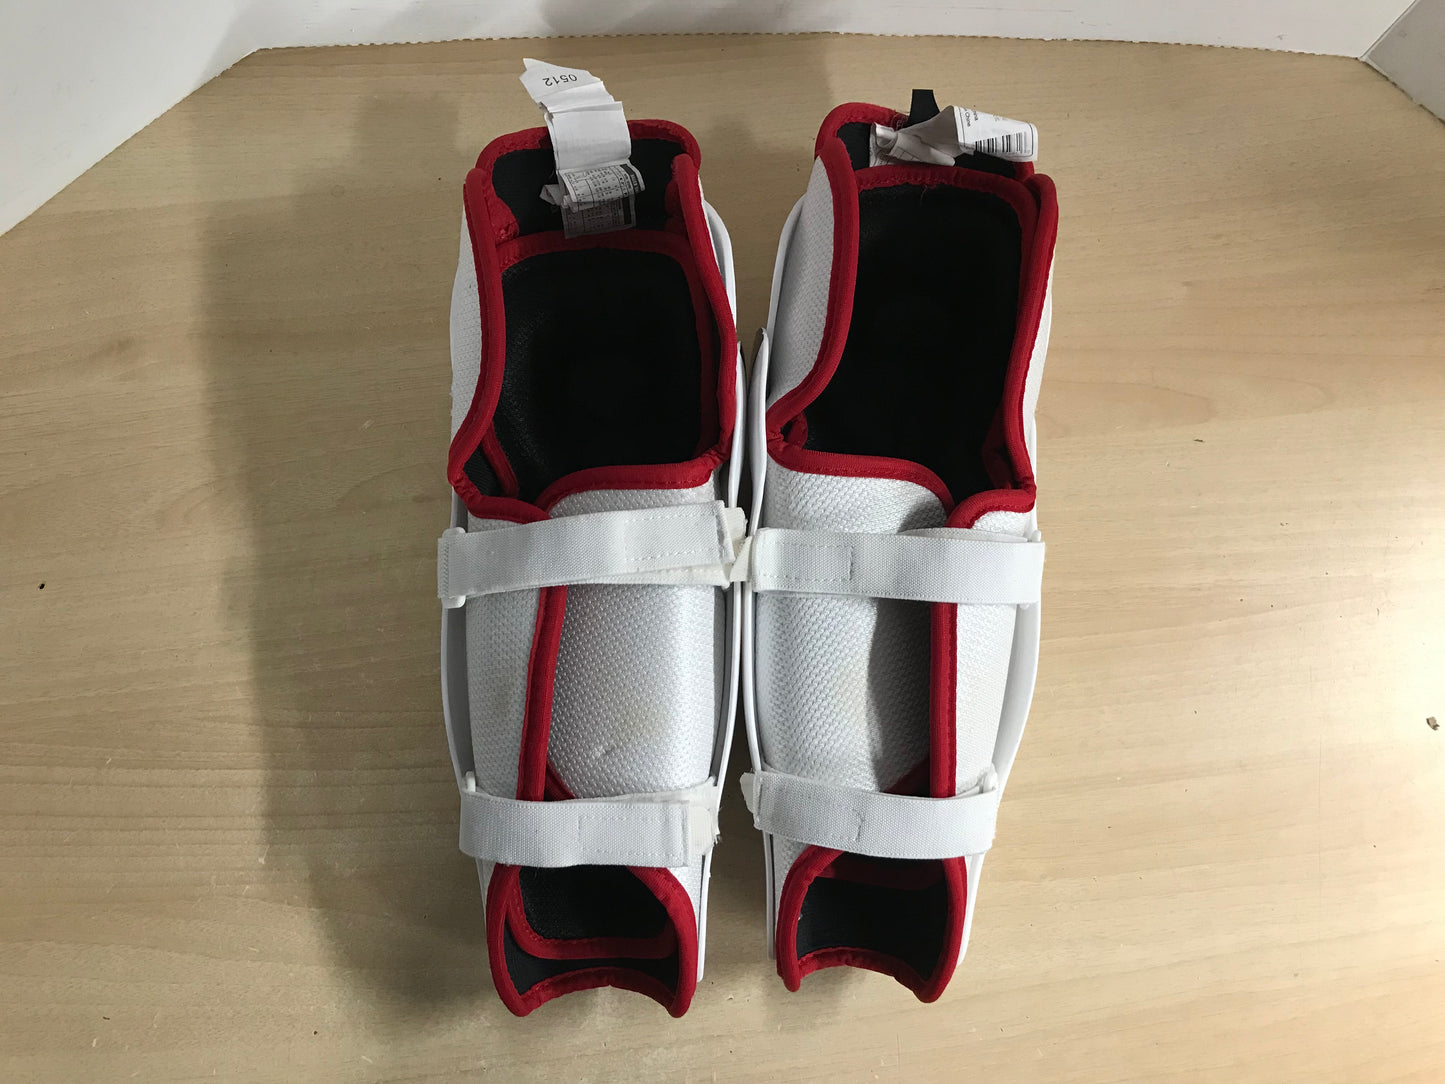 Hockey Shin Pad Child Size 12 inch Junior White Red Black Excellent As New